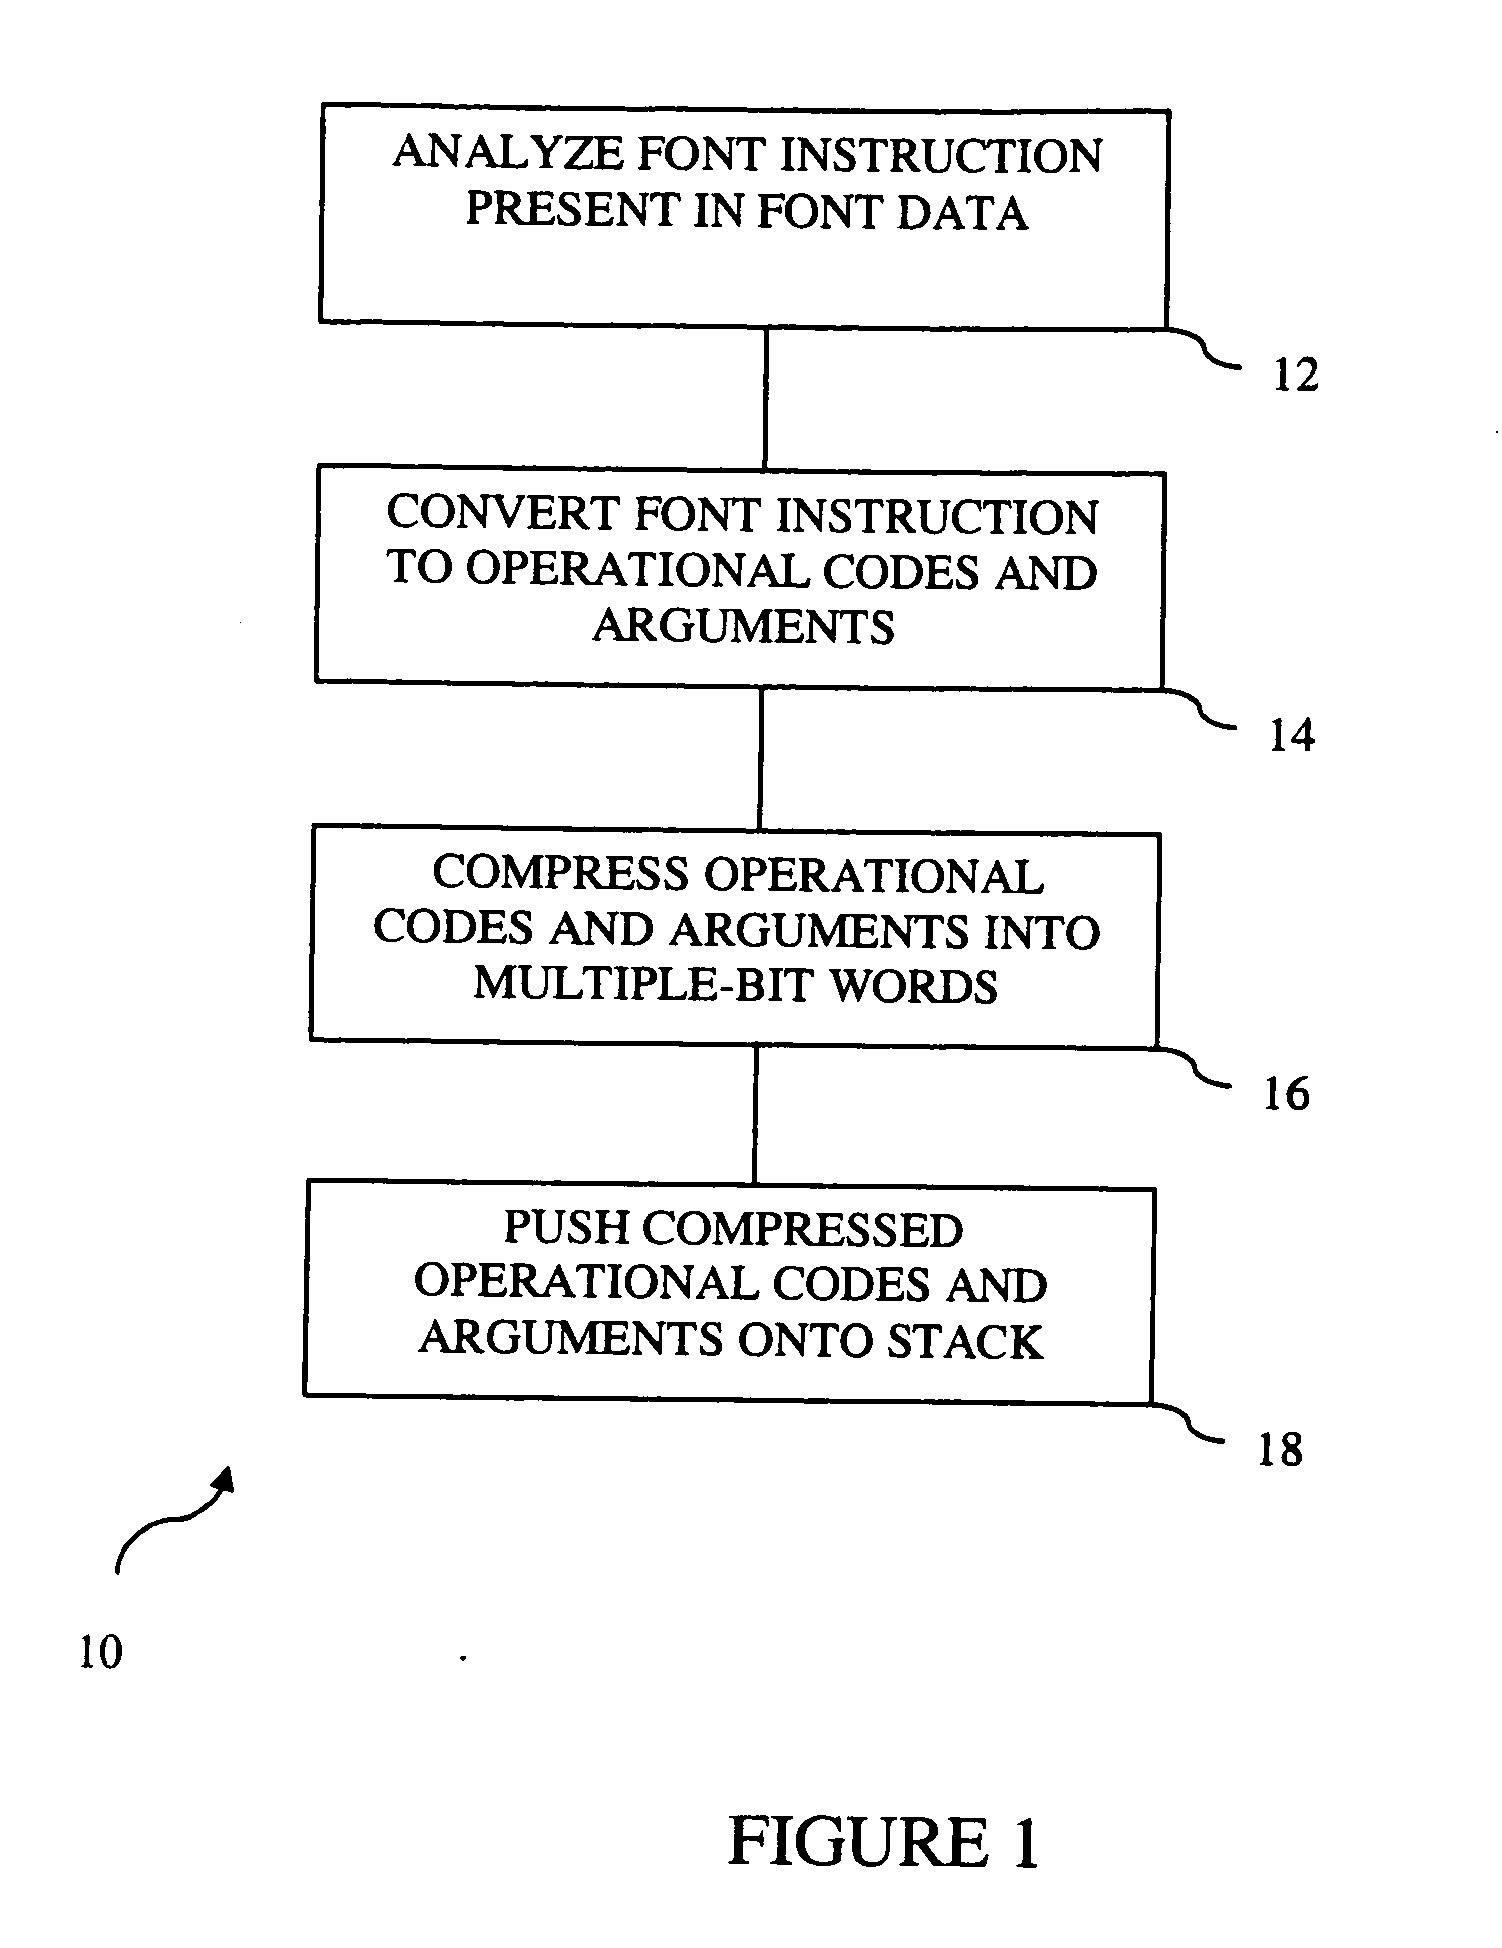 Method for reducing size and increasing speed for font generation of instructions